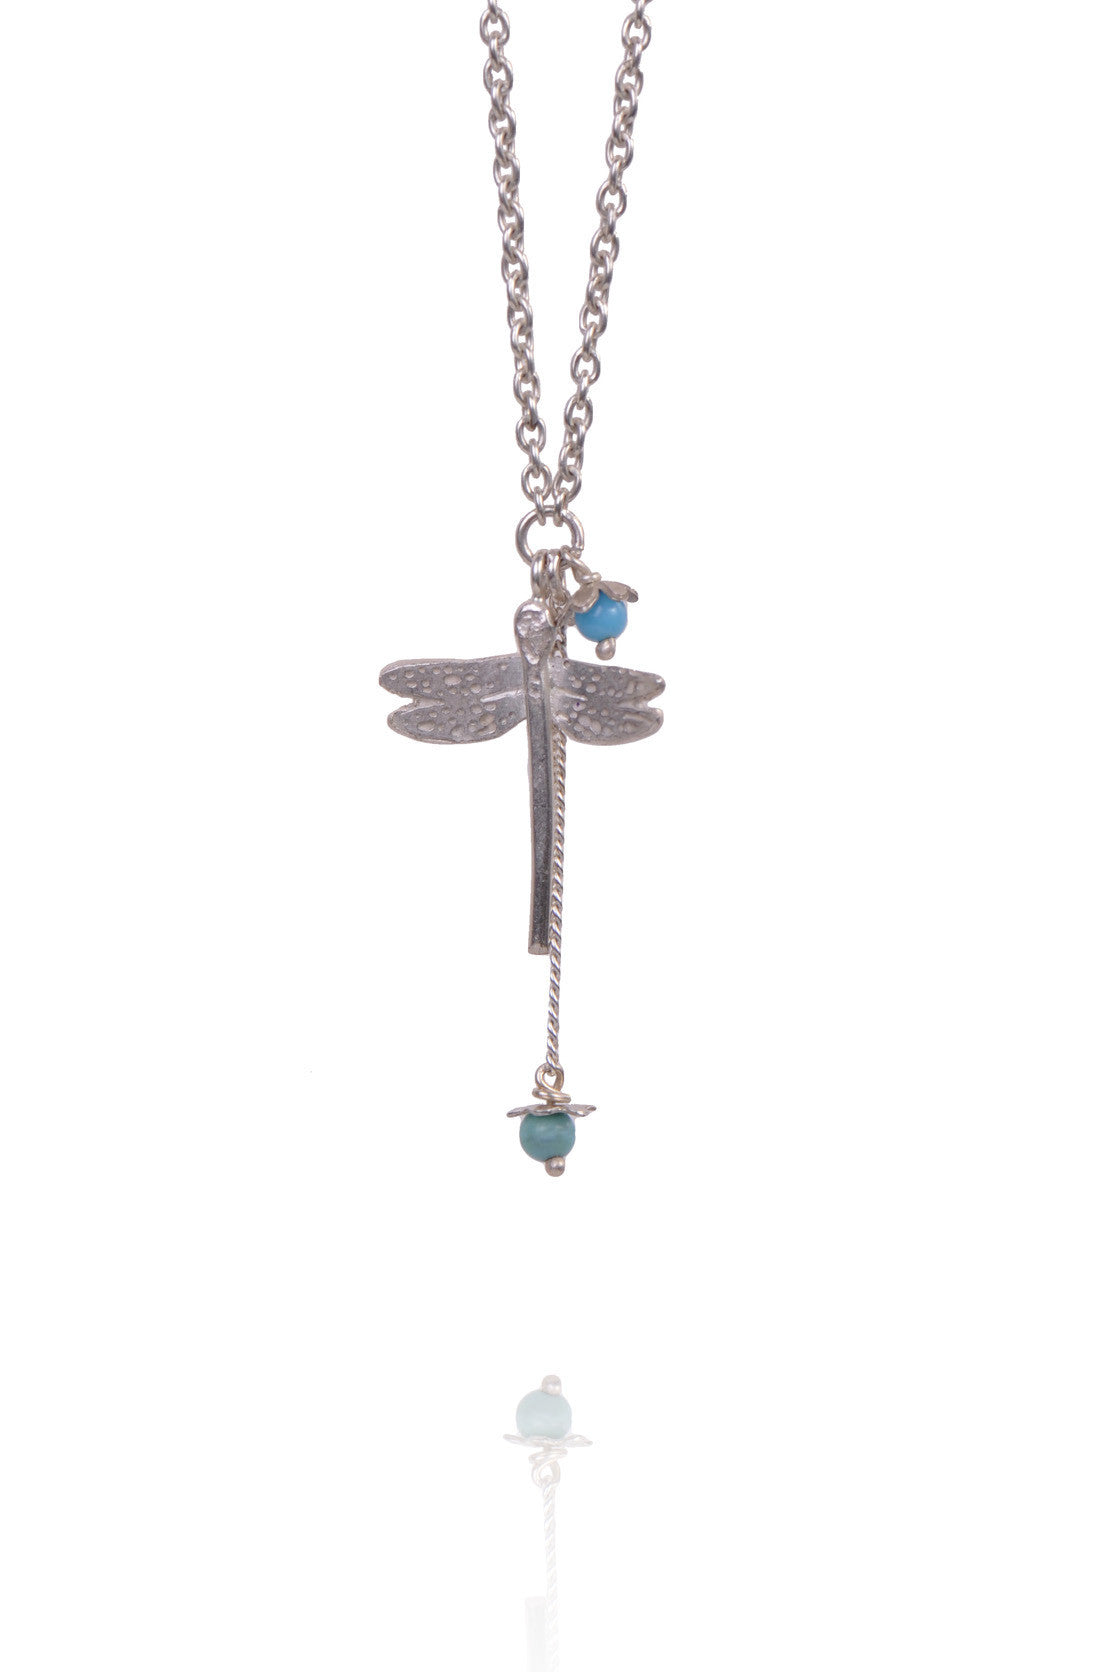 Dragonfly and Little Flower Pendant